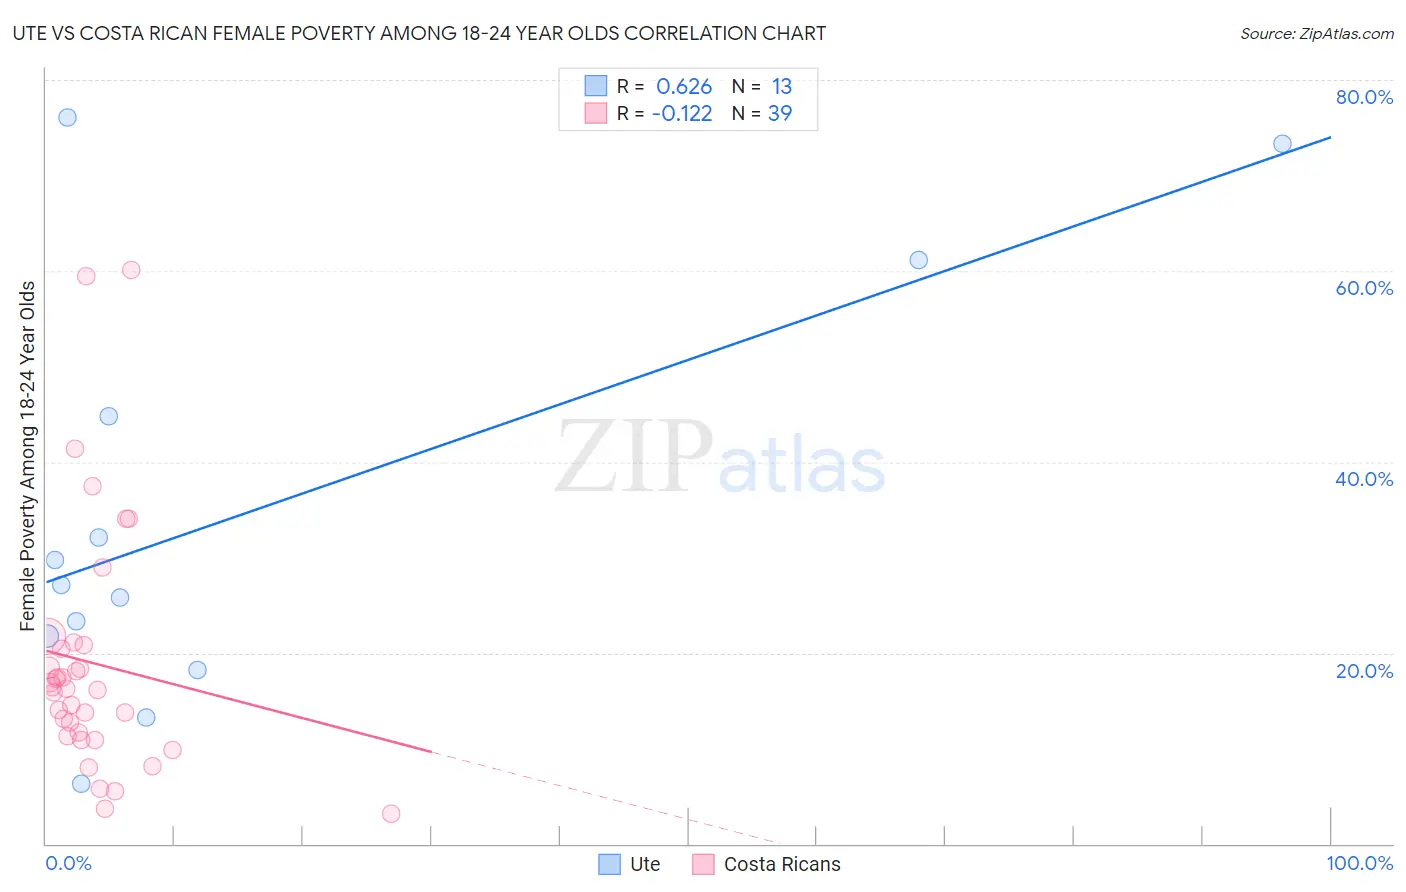 Ute vs Costa Rican Female Poverty Among 18-24 Year Olds